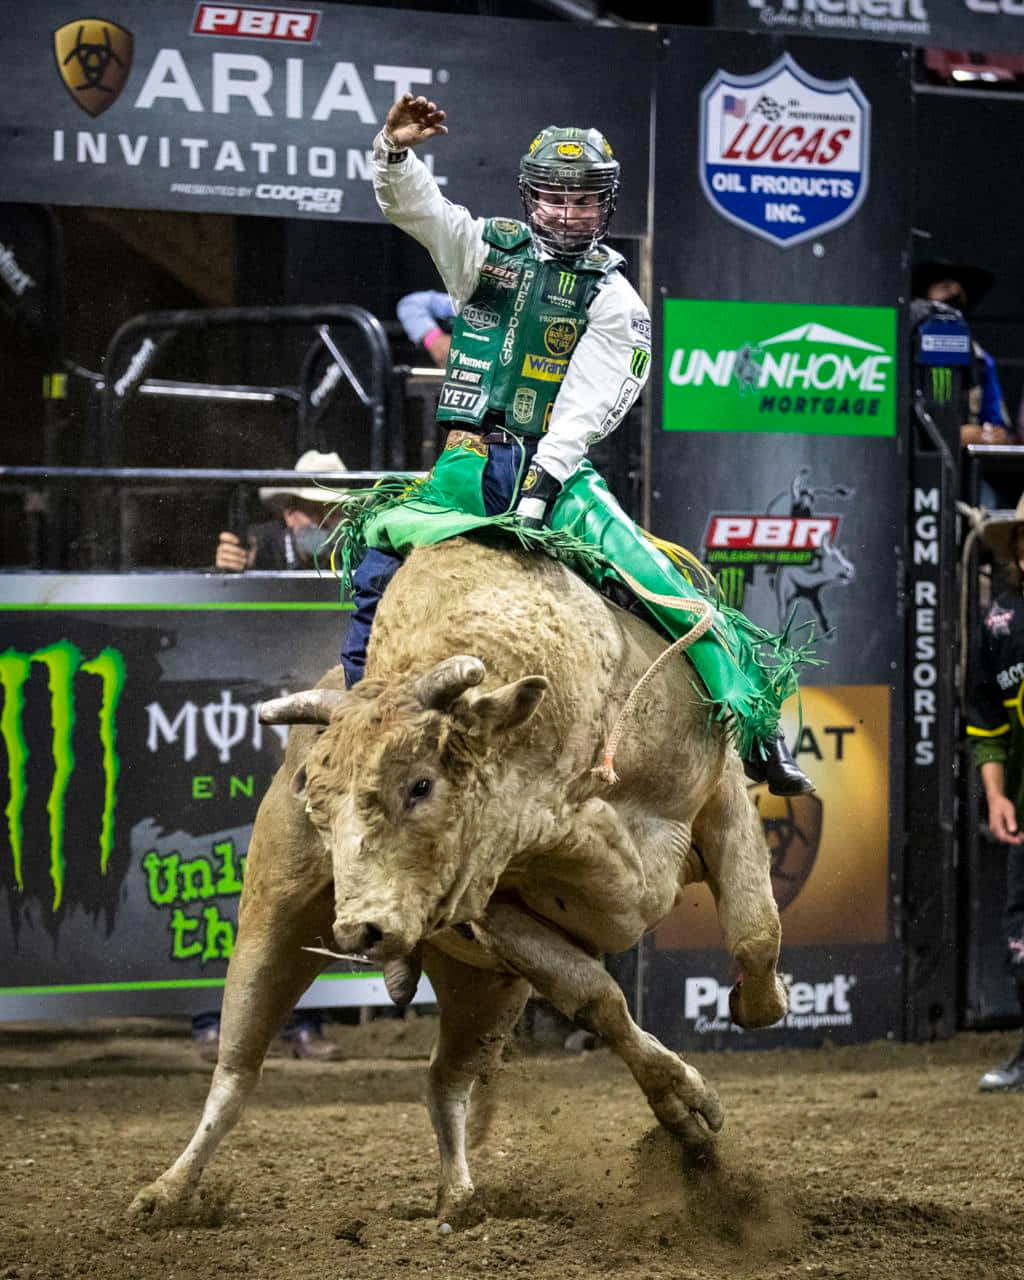 A Professional Bull Rider Prepares to Make His Run At the Rodeo